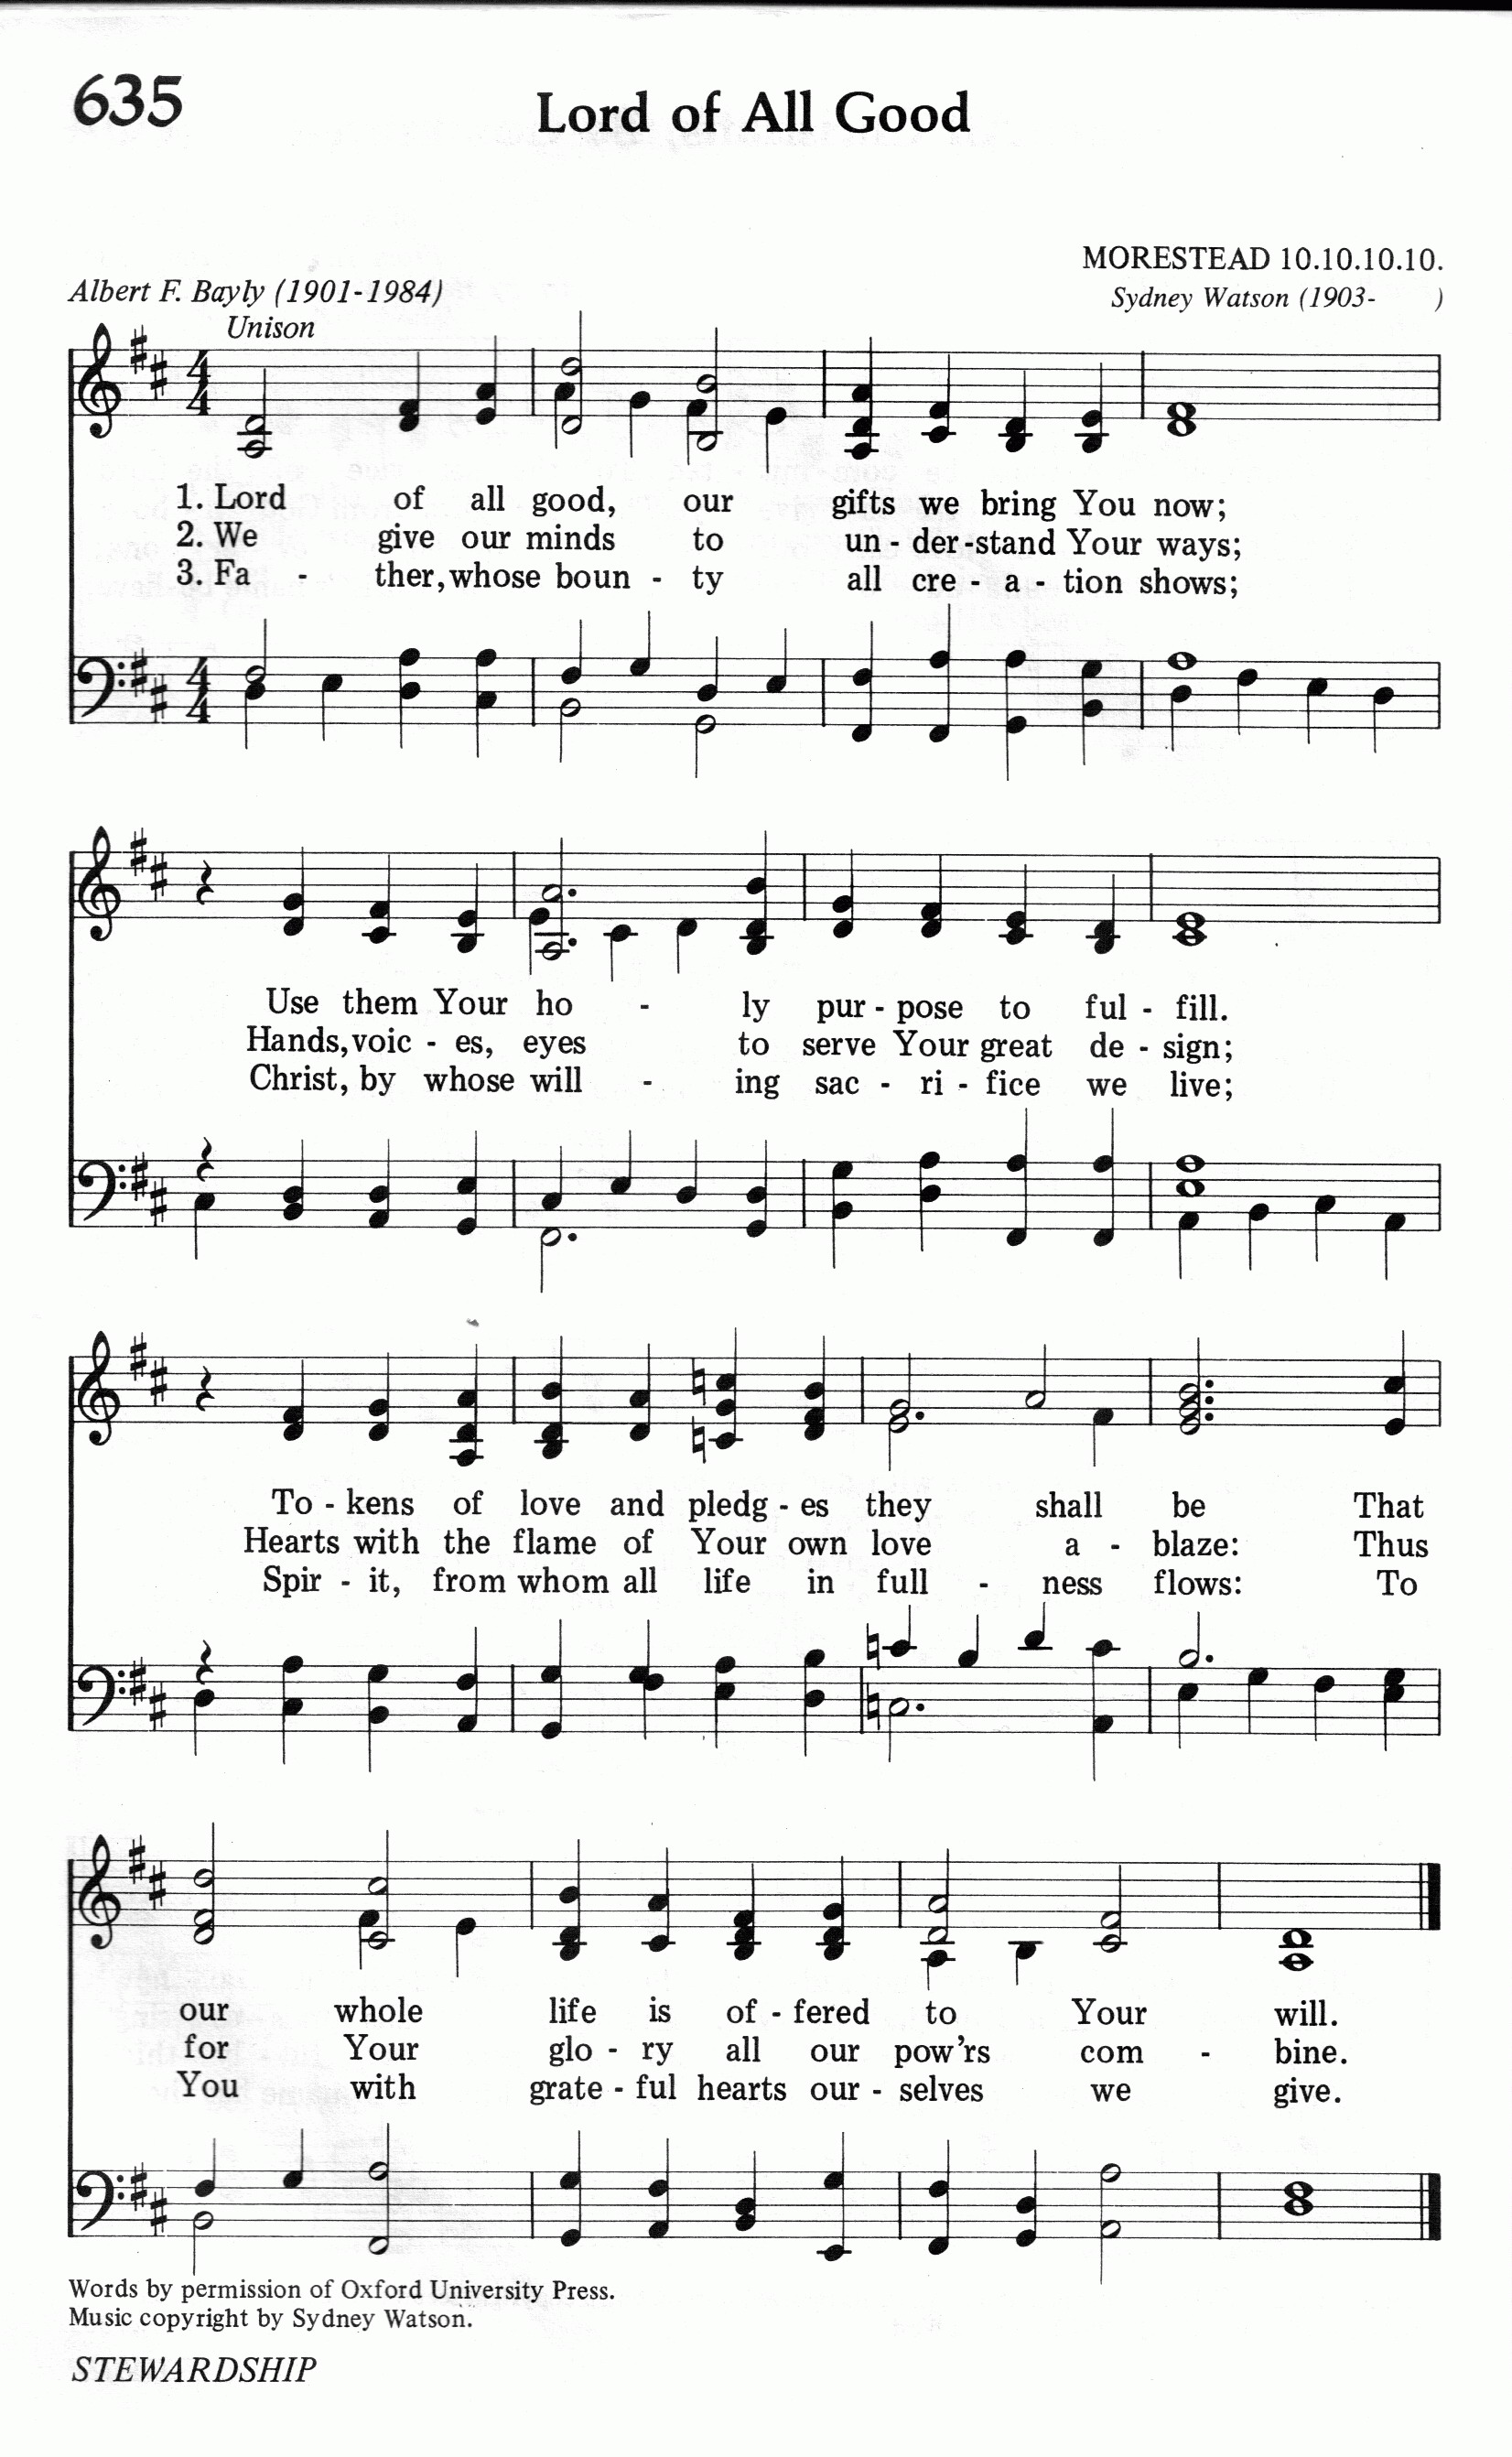 635.Lord of All Good-695HYMN